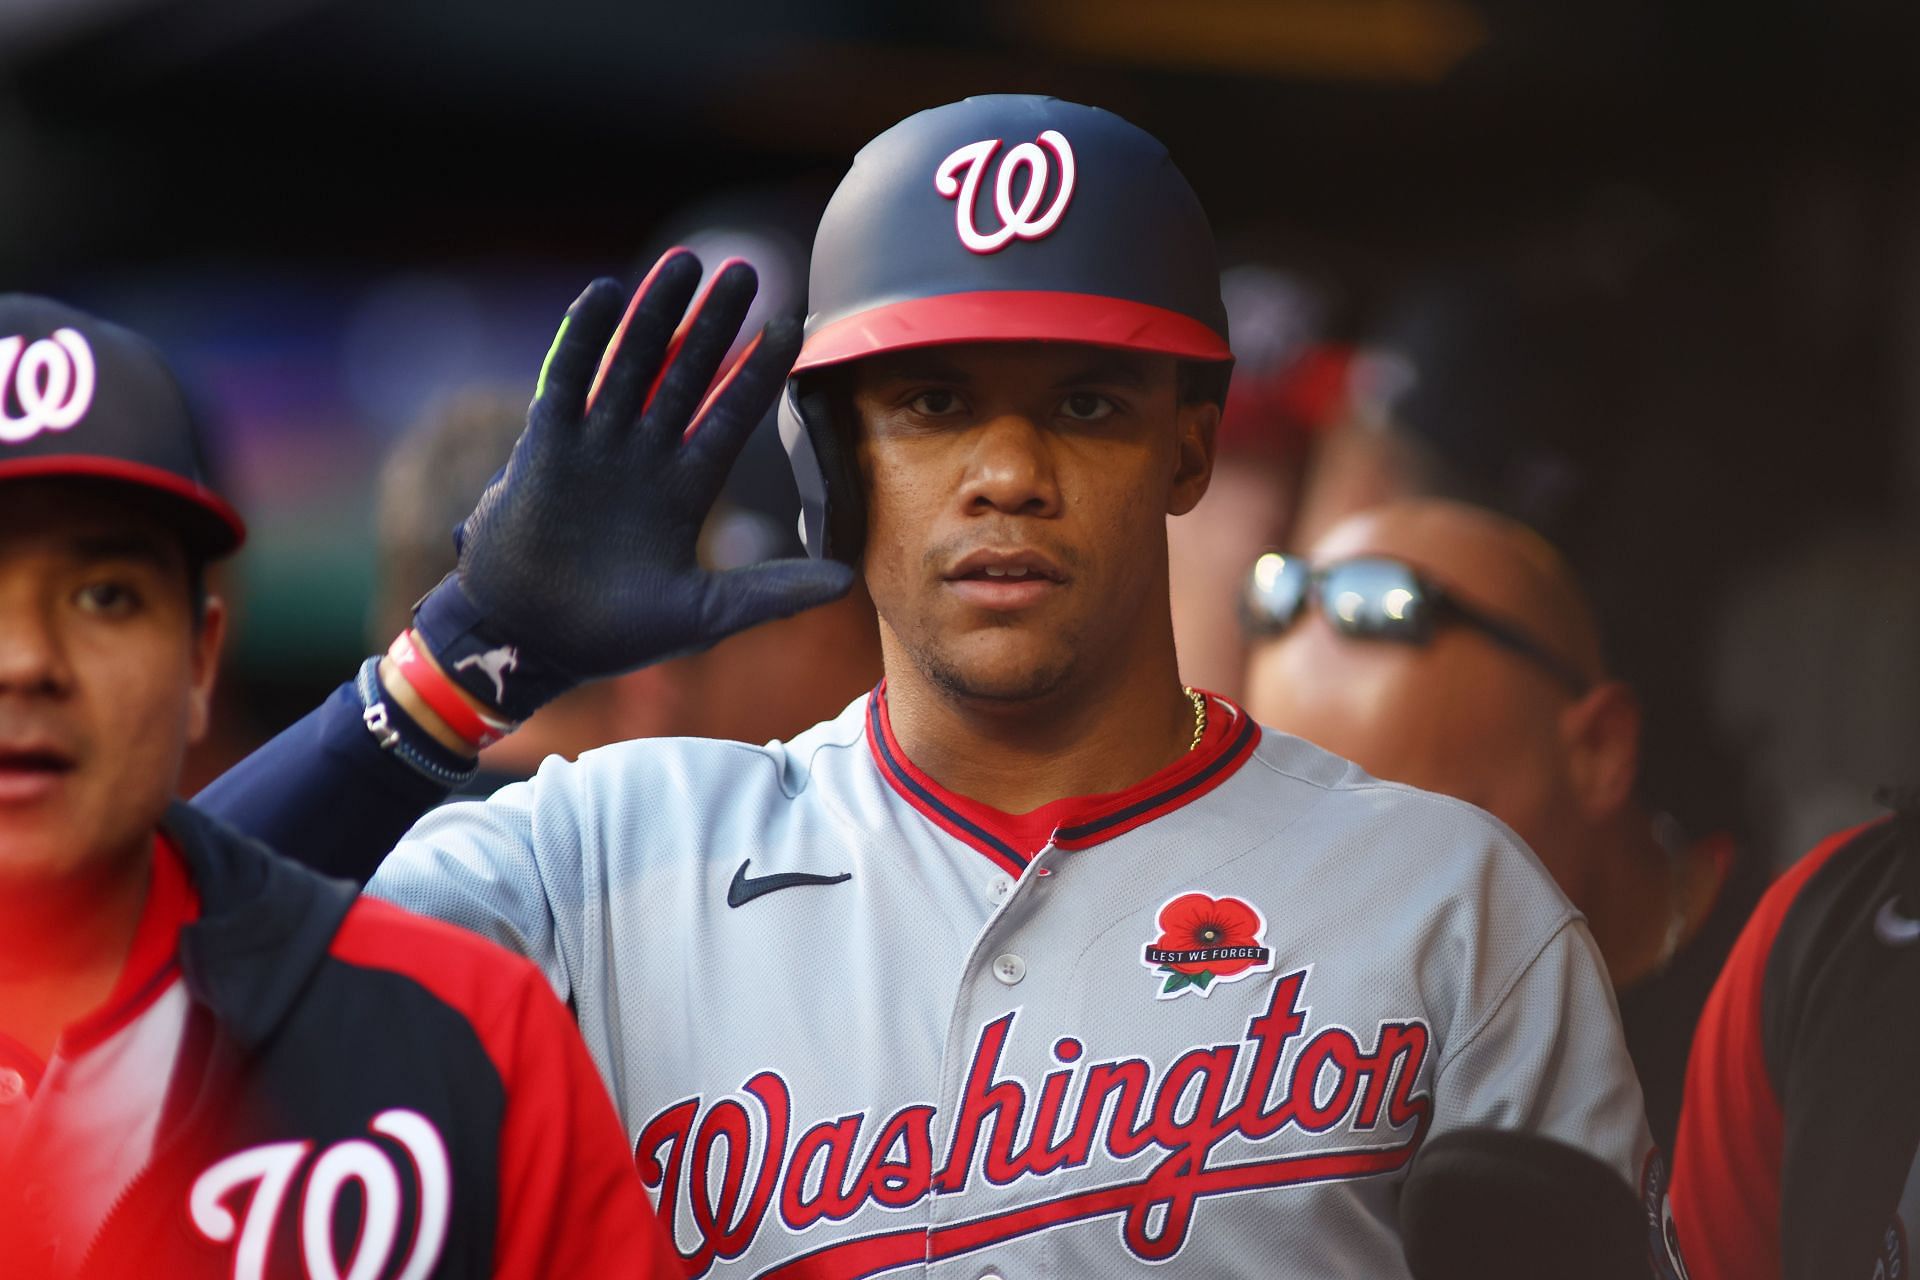 Washington Nationals - 500 hits in the career of Juan Soto.